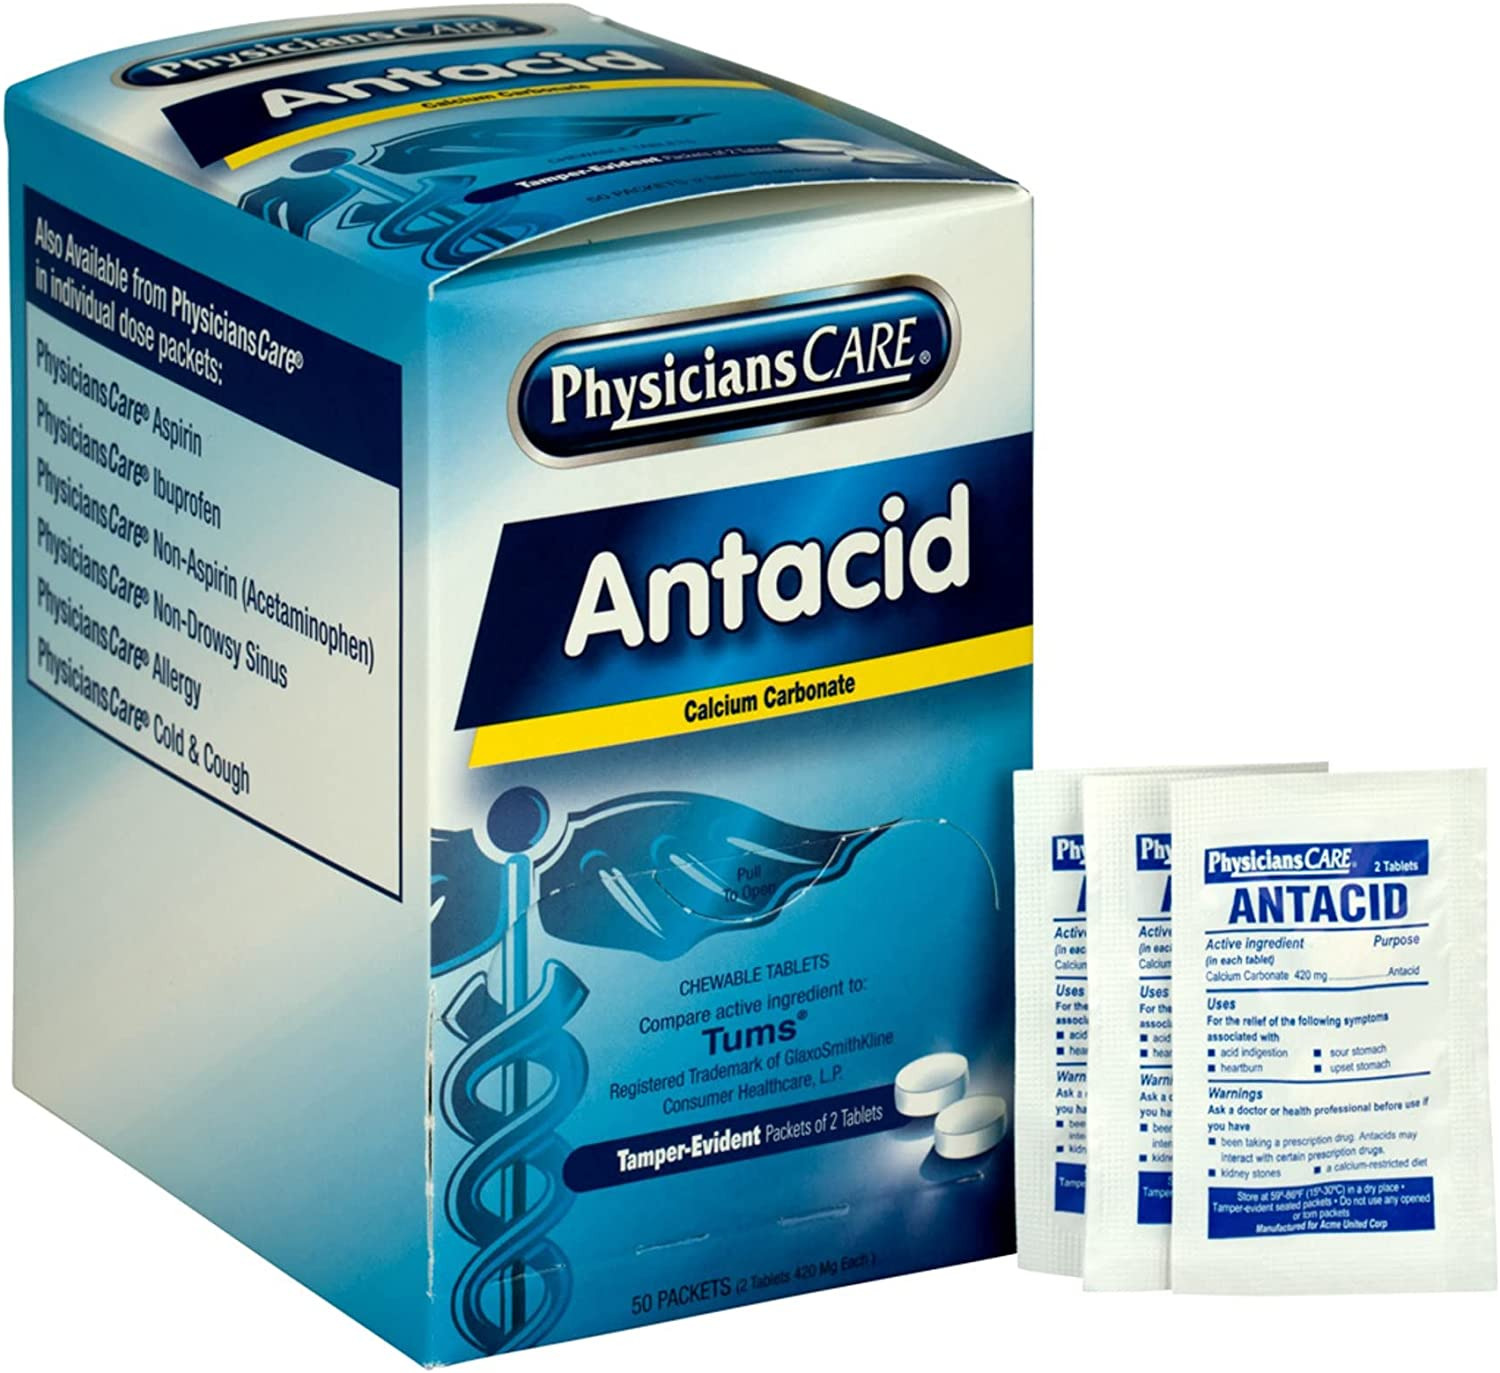 Antacid Heartburn Medication (Compare to Tums), 50 Doses of Two Tablets, 420 Mg